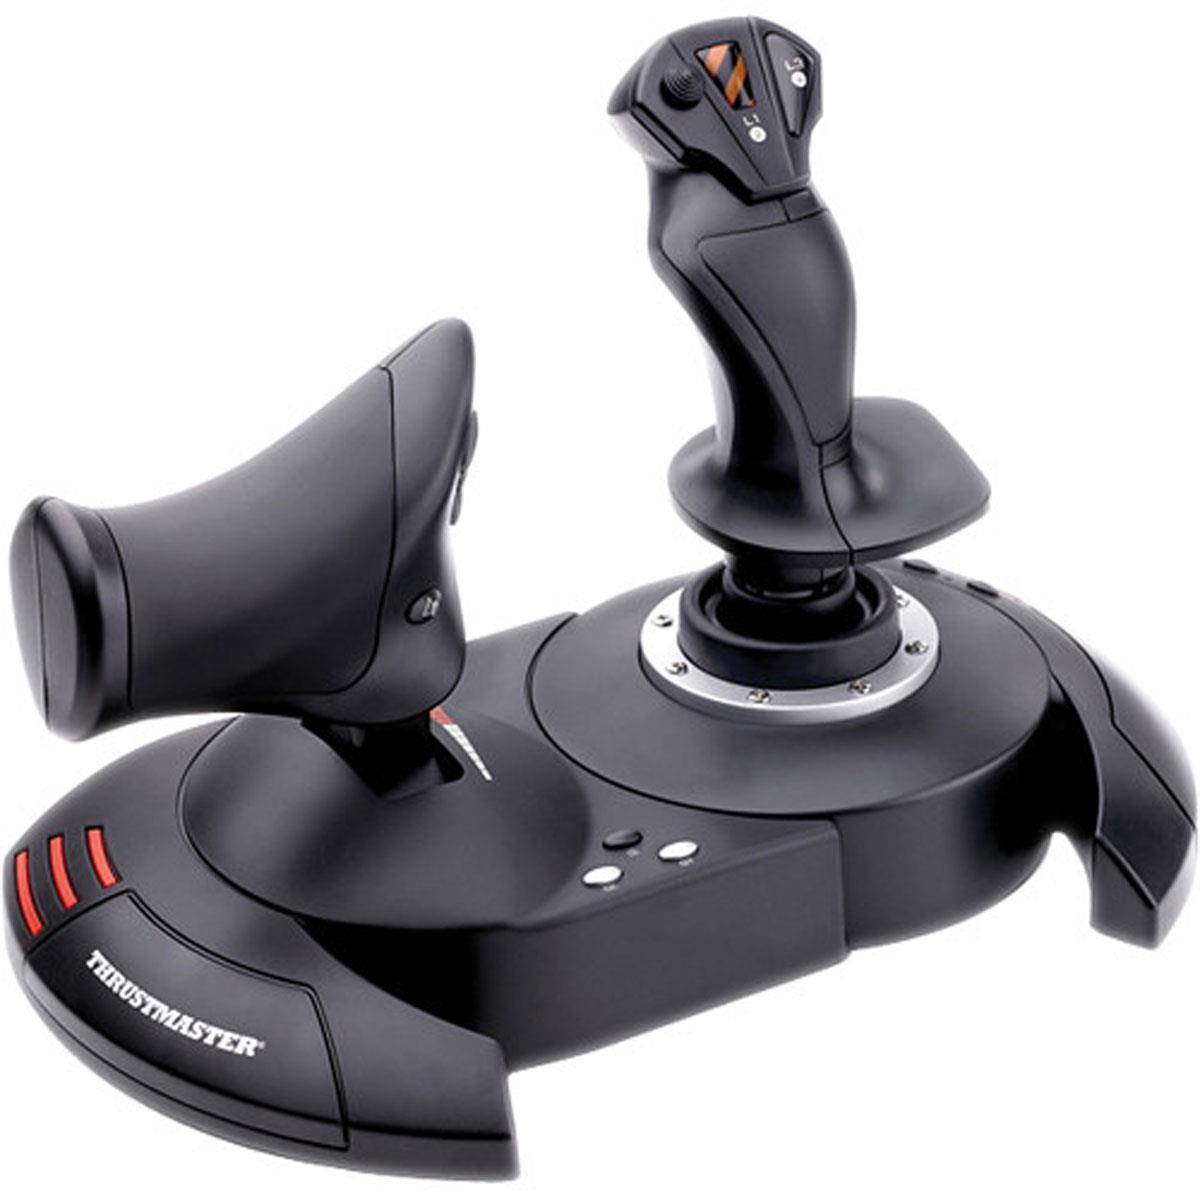 Image of Thrustmaster T. Flight Hotas X Joystick and Throttle for PC and PS3